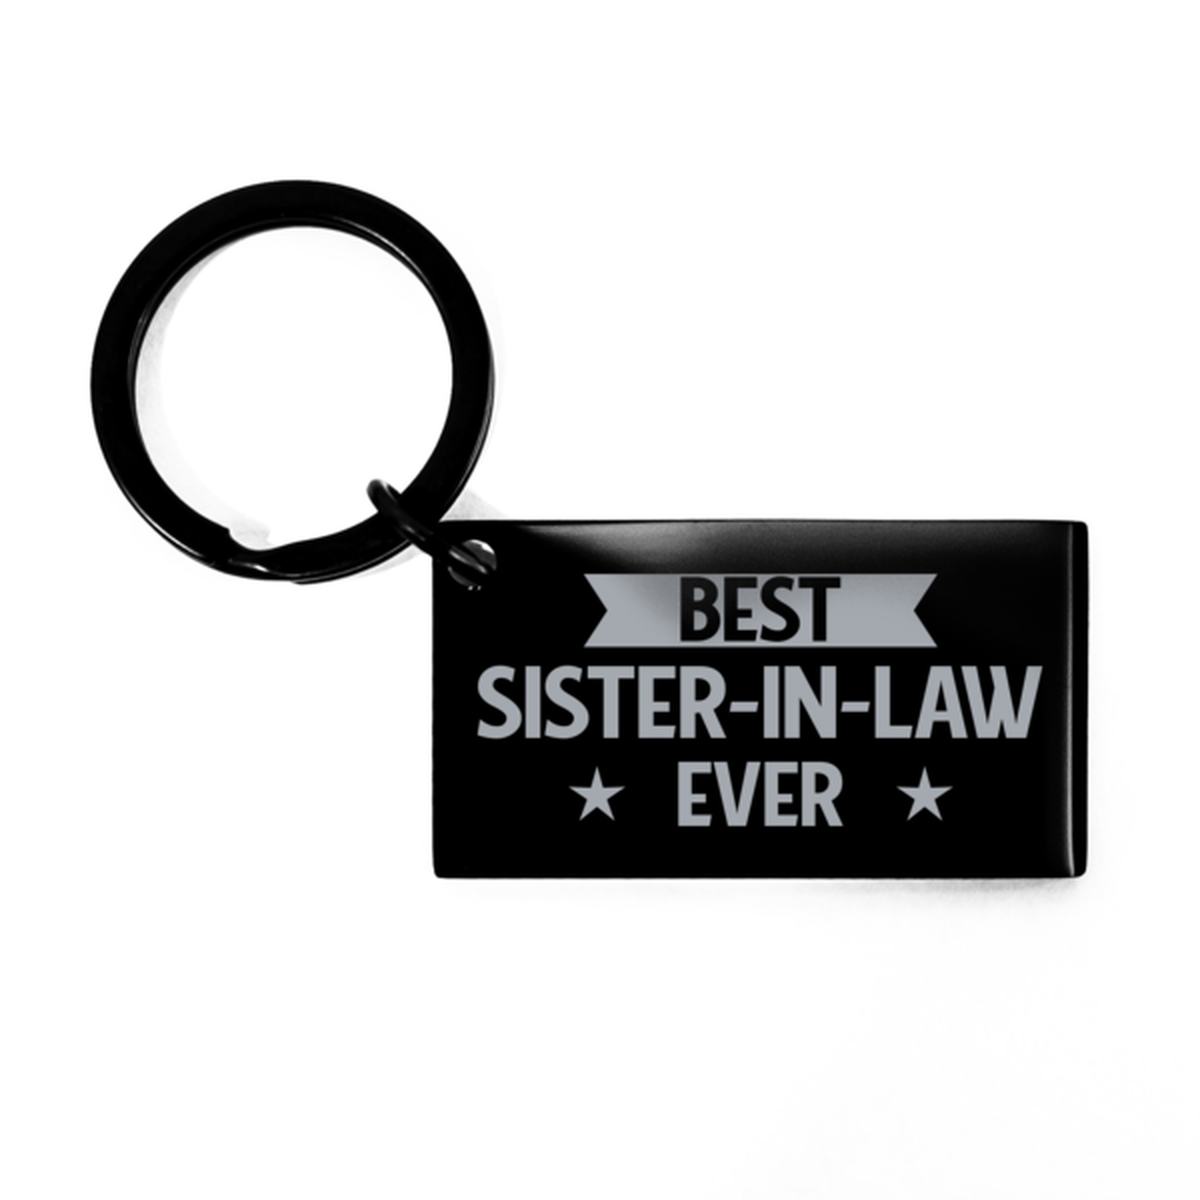 Best Sister-in-law Ever Sister-in-law Gifts, Funny Black Keychain For Sister-in-law, Birthday Engraved Keyring Presents For Women